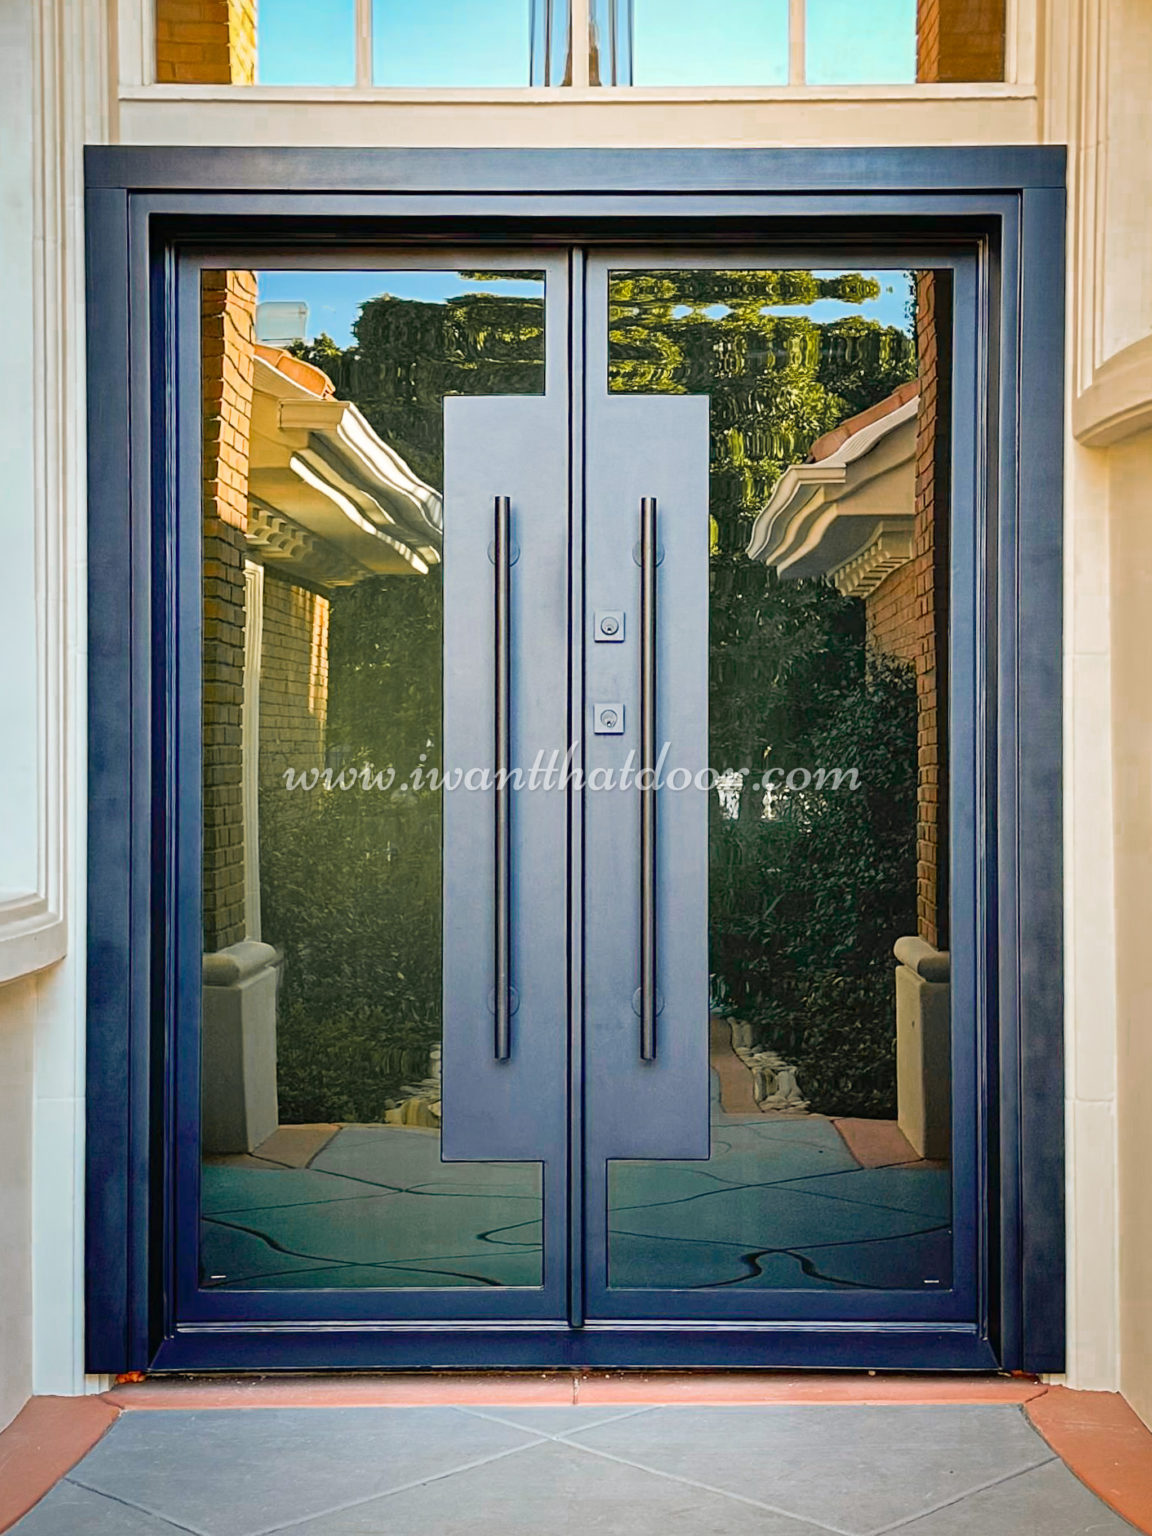 5 Reasons to Use Pivot Doors on Your Next Project